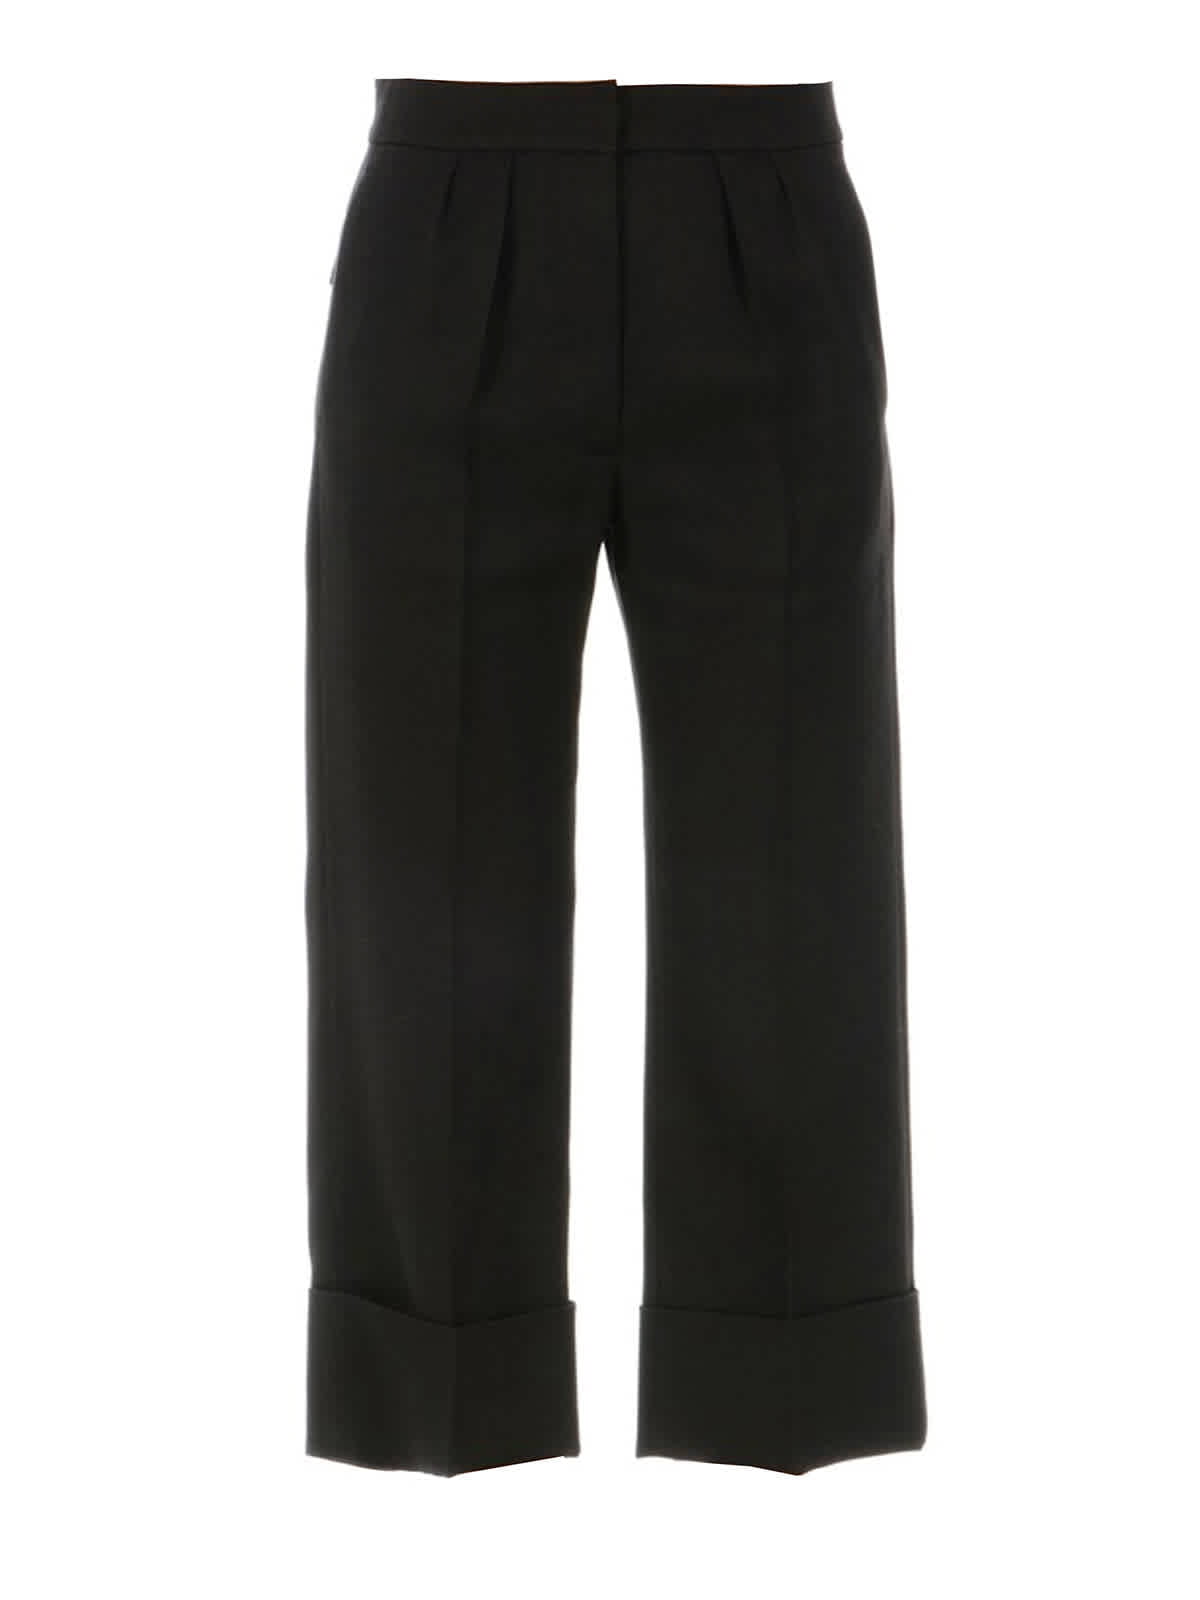 Burberry Ladies Wool Silk Cropped Tailored Trousers, Brand Size 4 (US Size  2) 